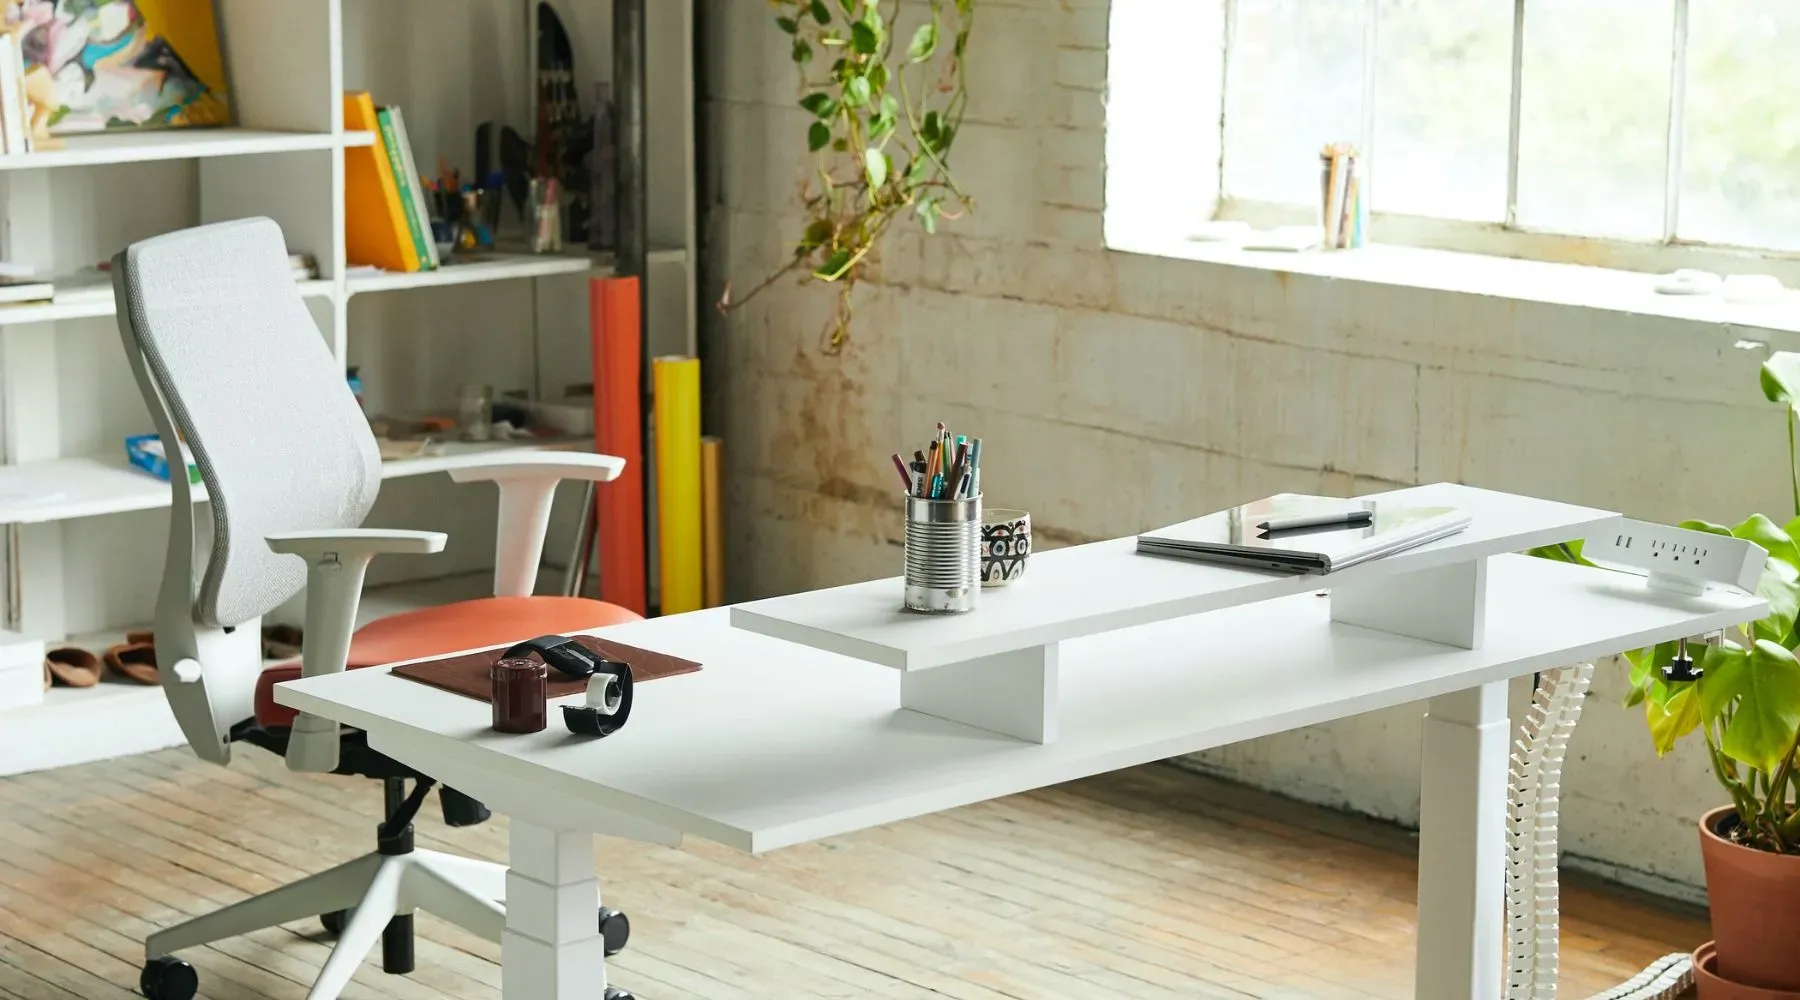 An ergonomically fit workstation with a standing desk option